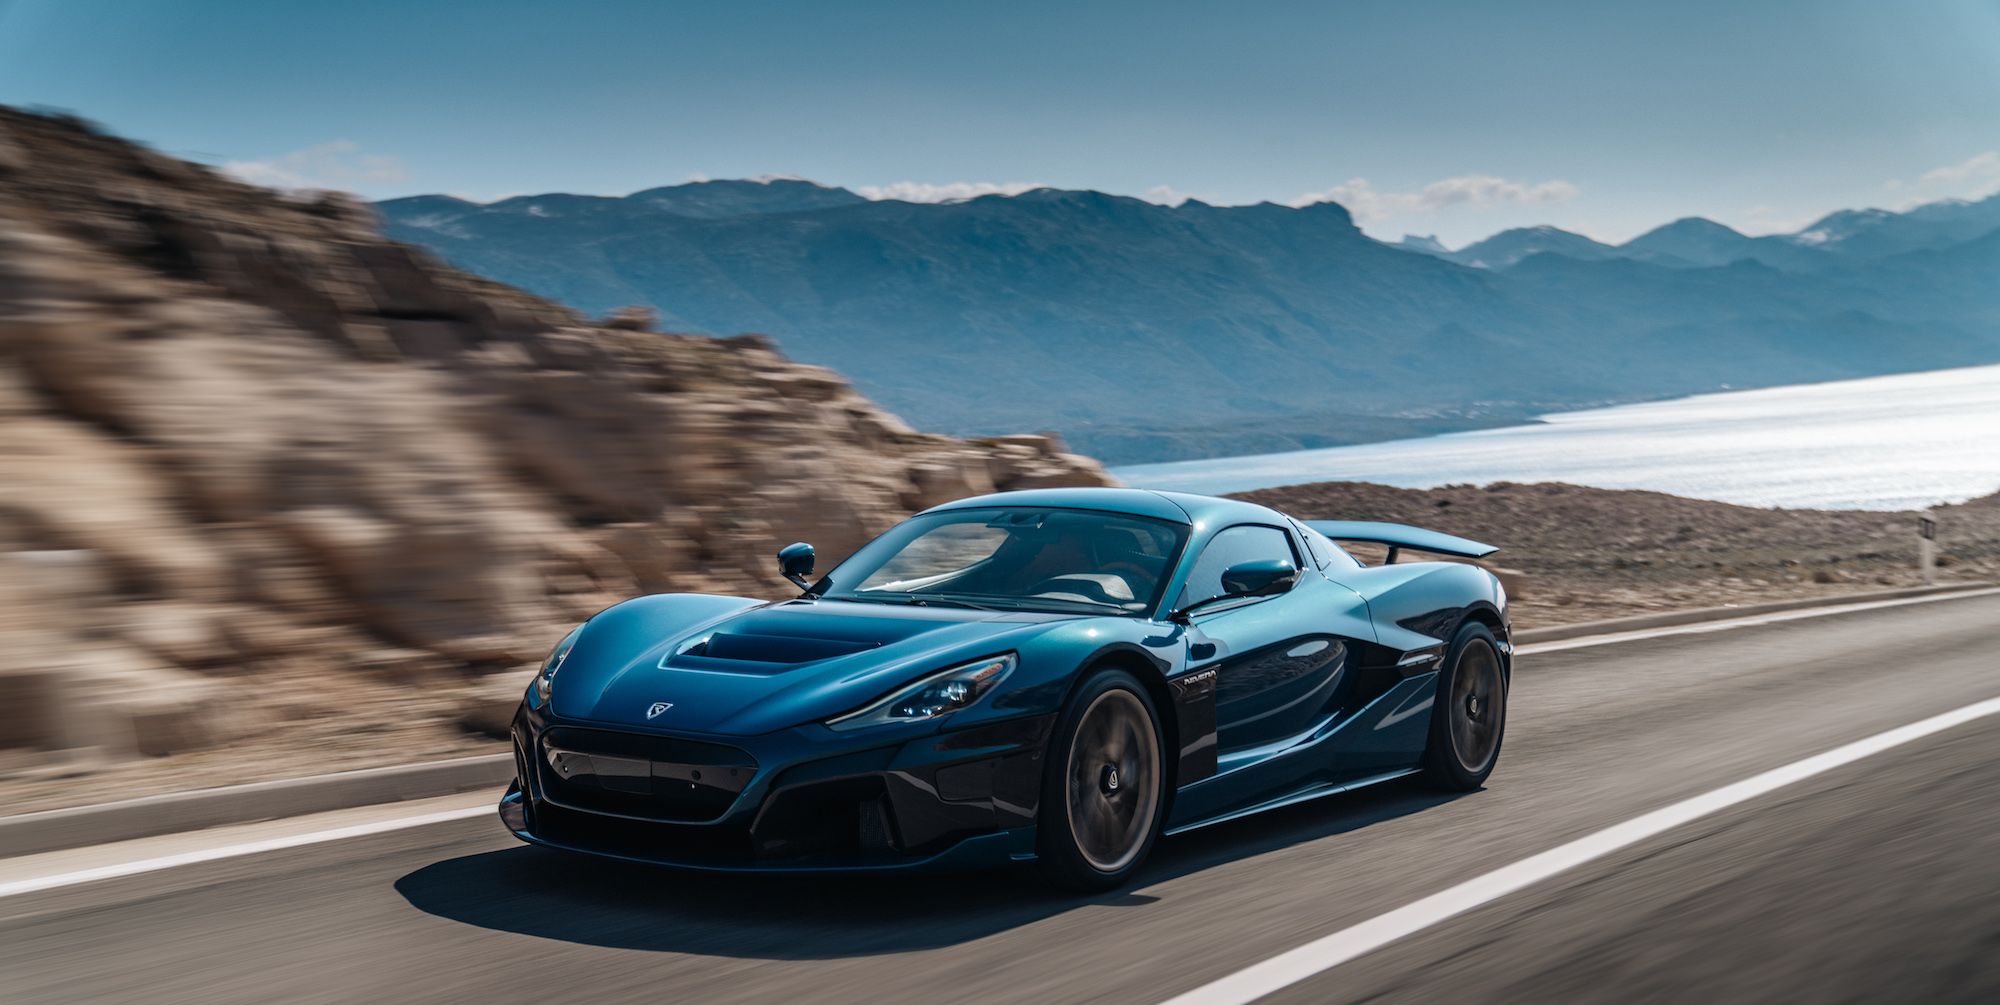 Rimac and BMW Take on the Electric Future Together